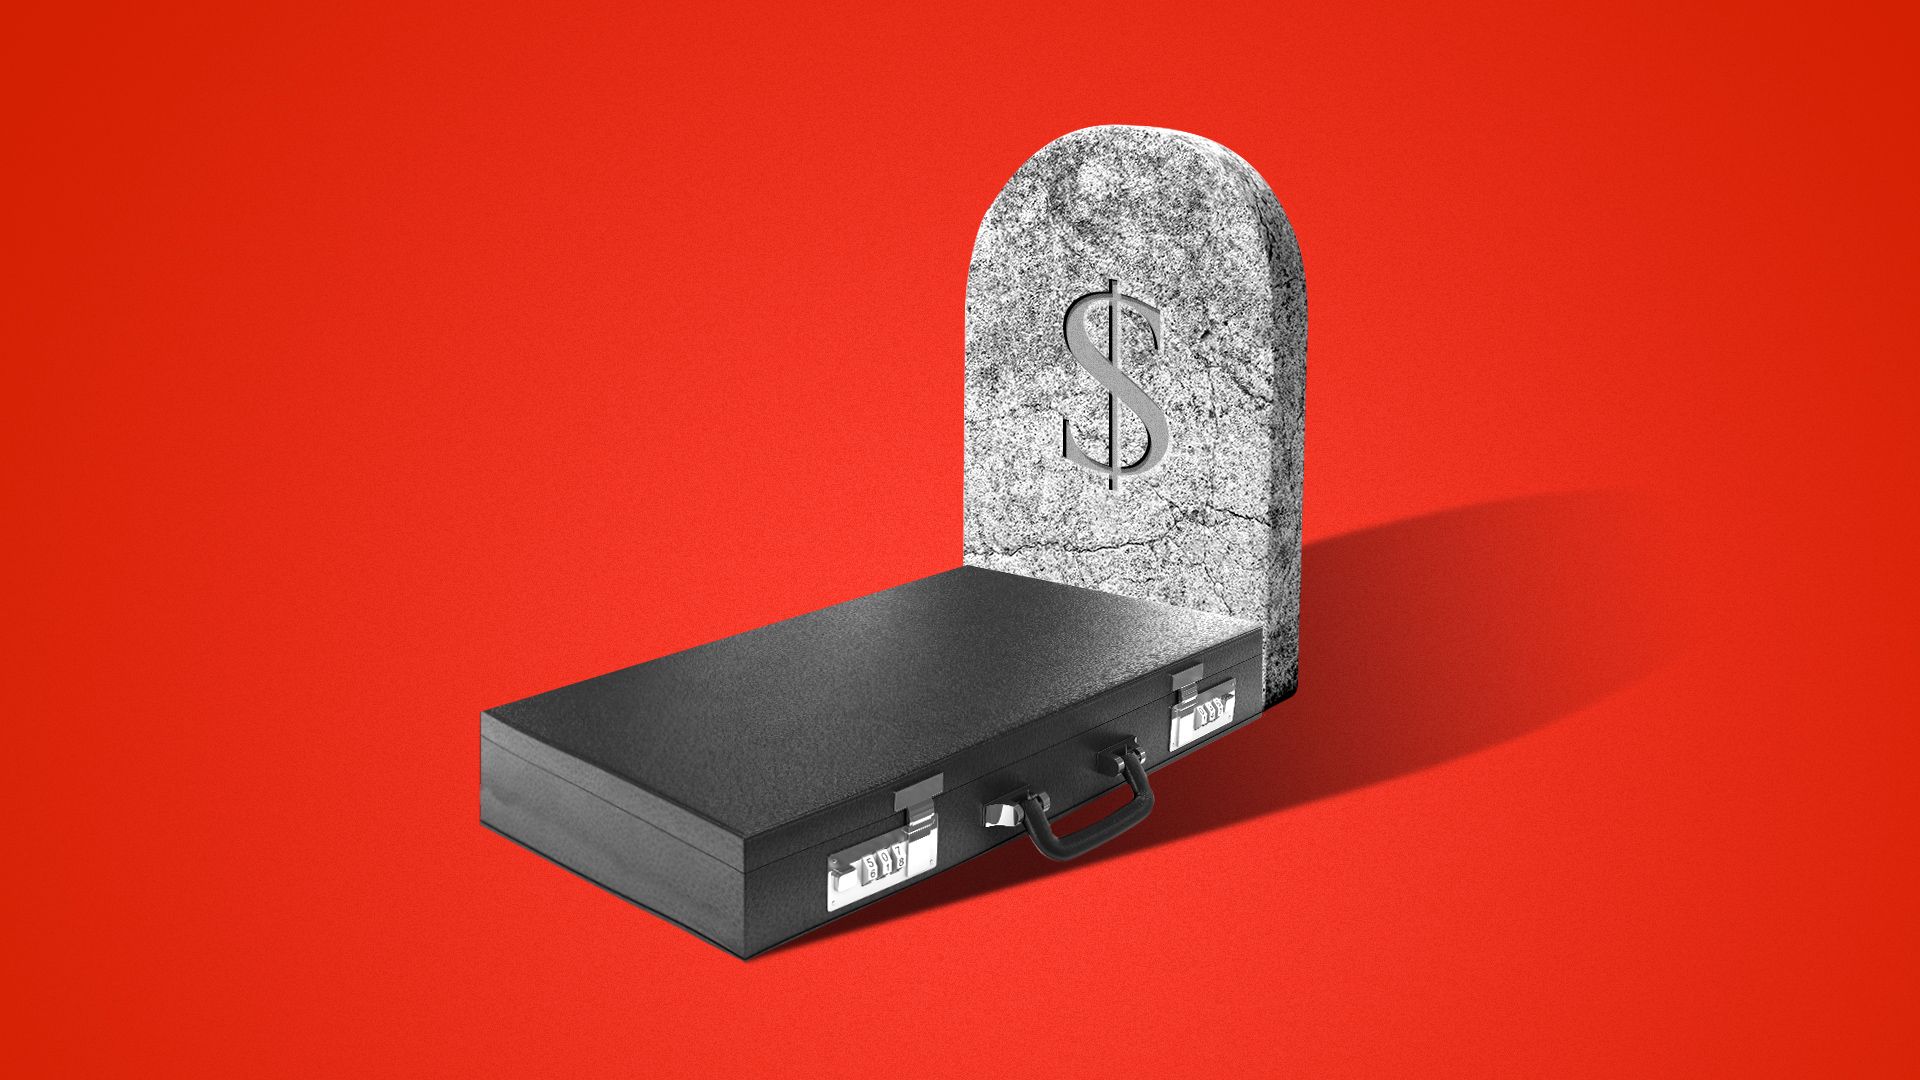 Illustration of a briefcase in front of a gravestone that reads "$".